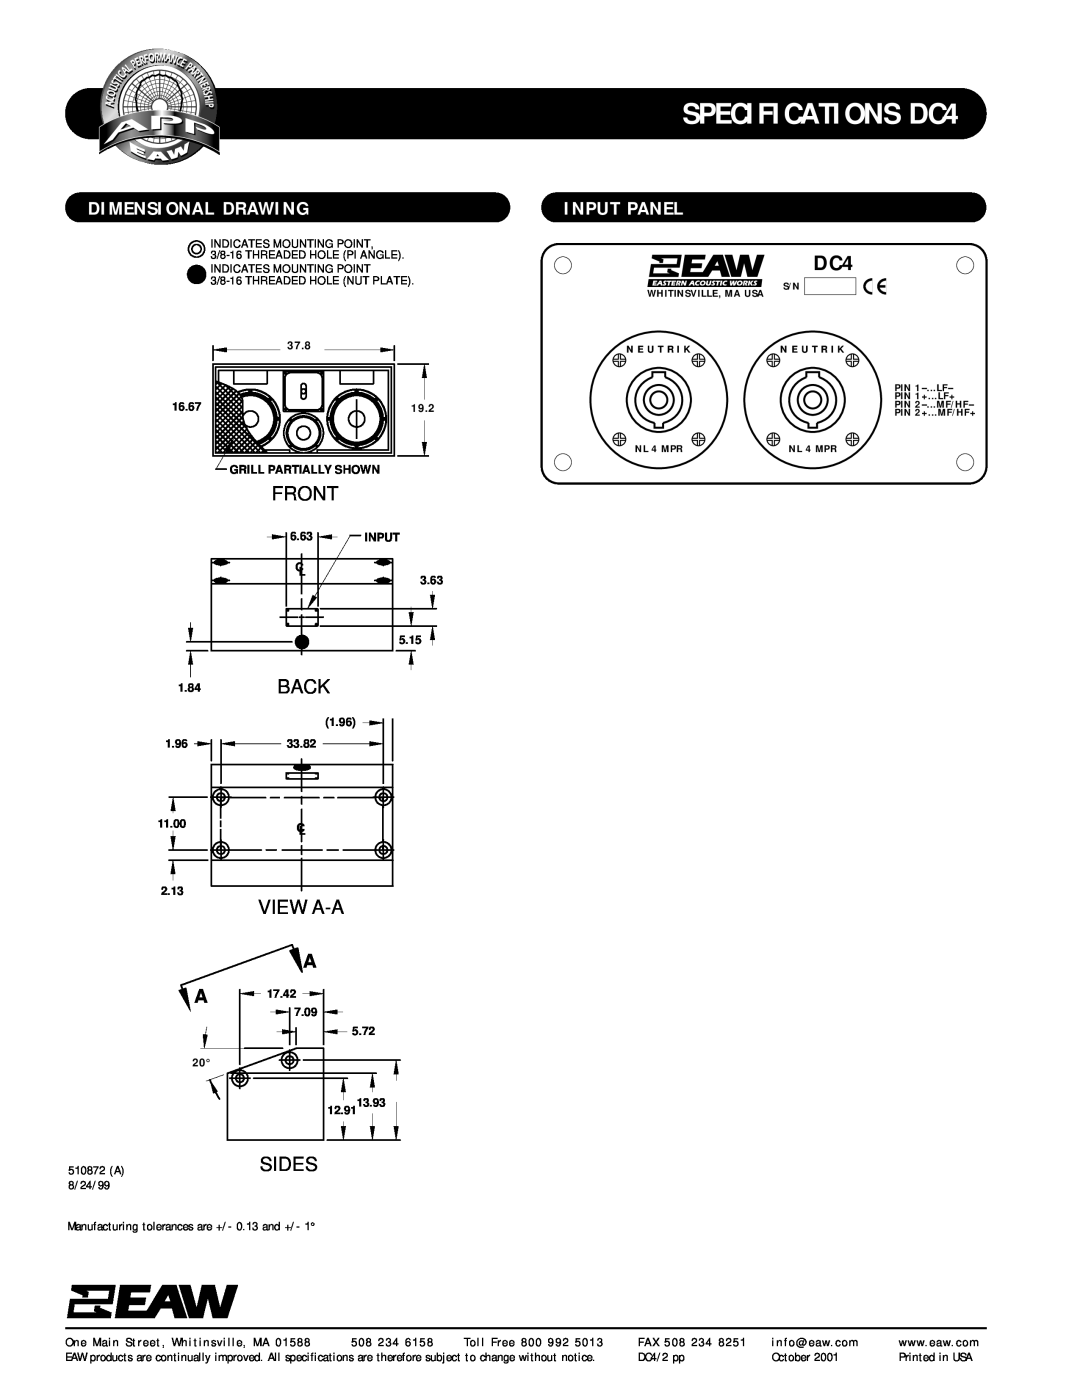 EAW Dimensional Drawing, Input Panel, SPECIFICATIONS DC4, Front, 1.84BACK, View A-A, Sides, 37.8, 16.67, 19.2, 6.63 CL 